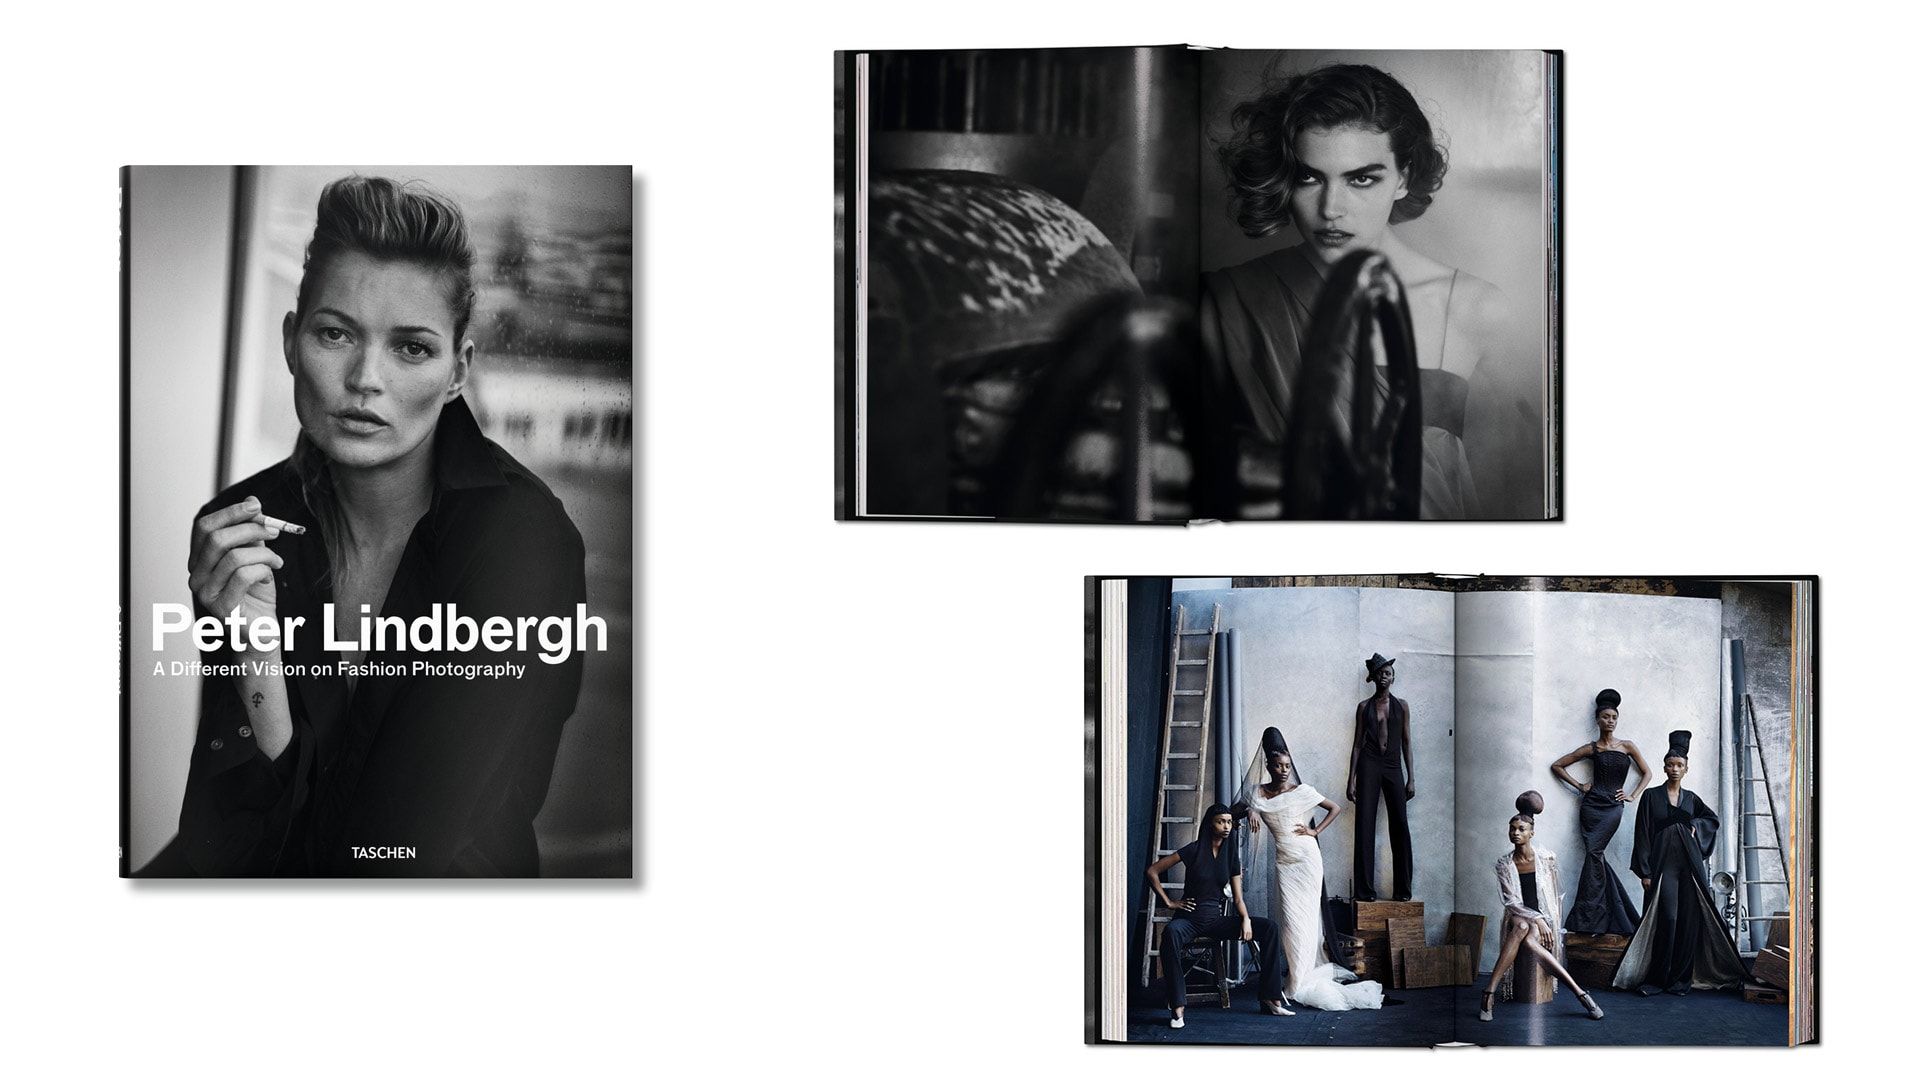 Peter Lindbergh: A Different Vision on Portrait Photography, published by Taschen